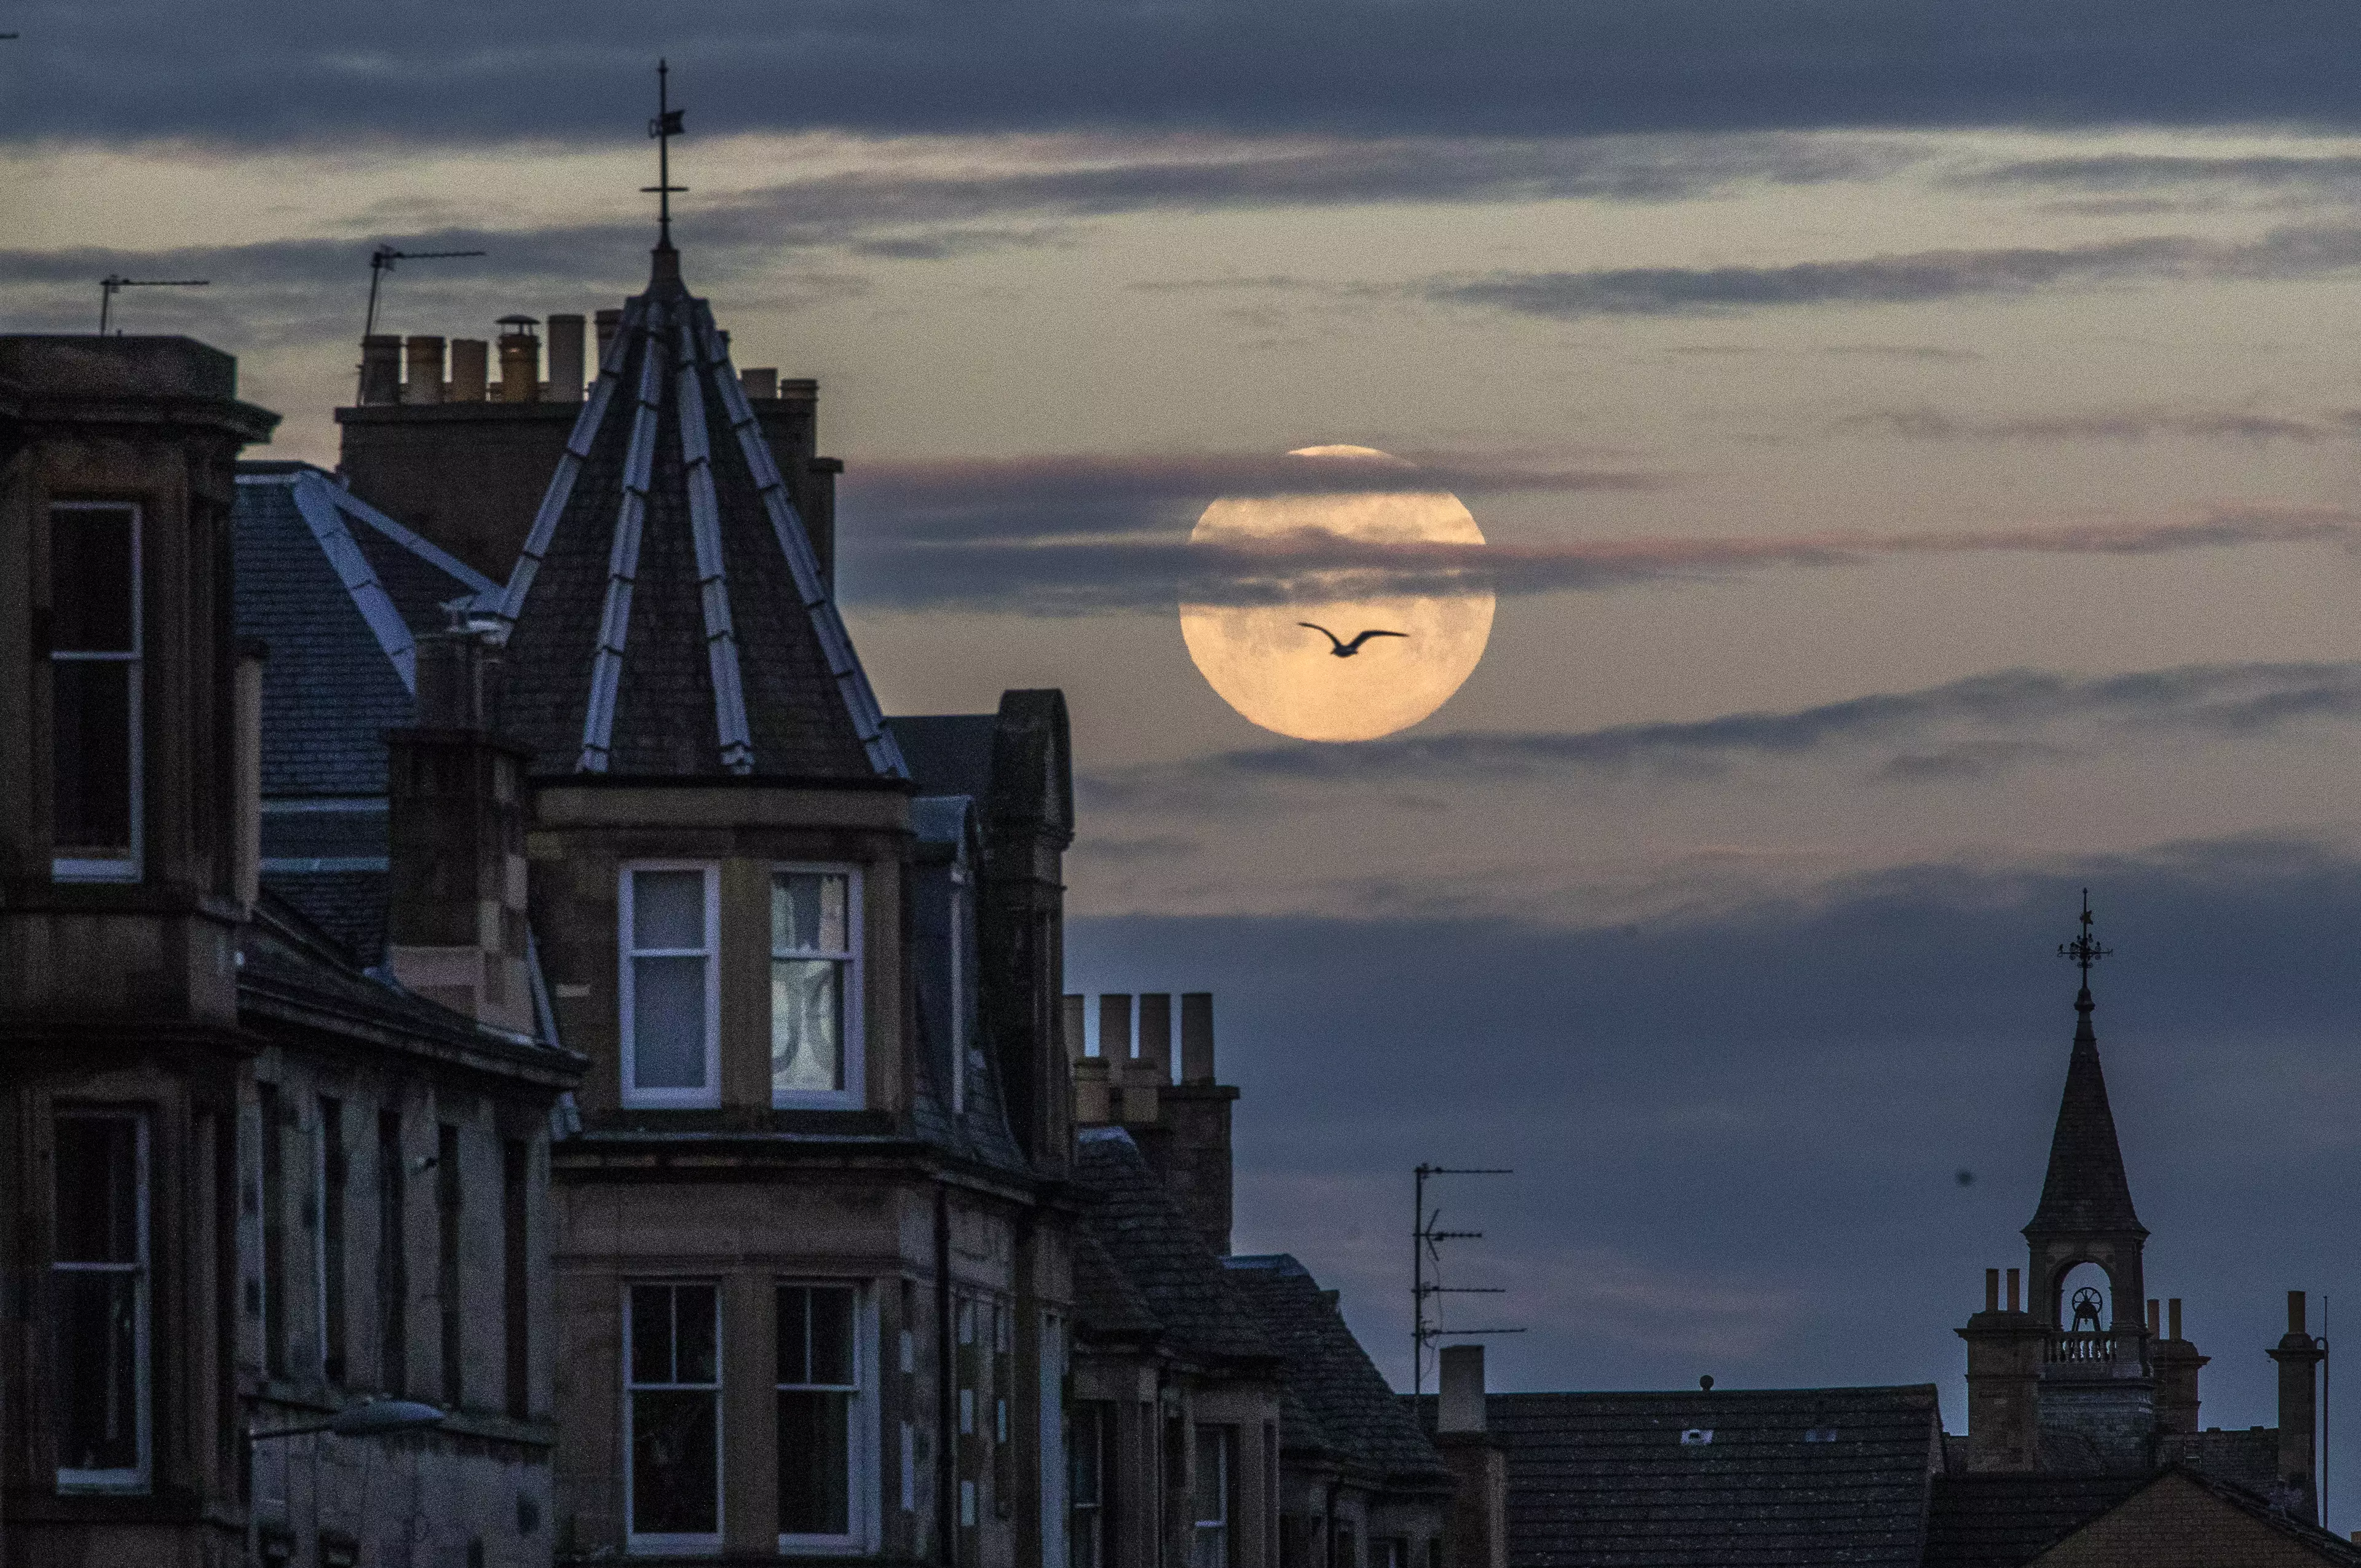 The pink supermoon peaked at around 3.30am in the UK last night (